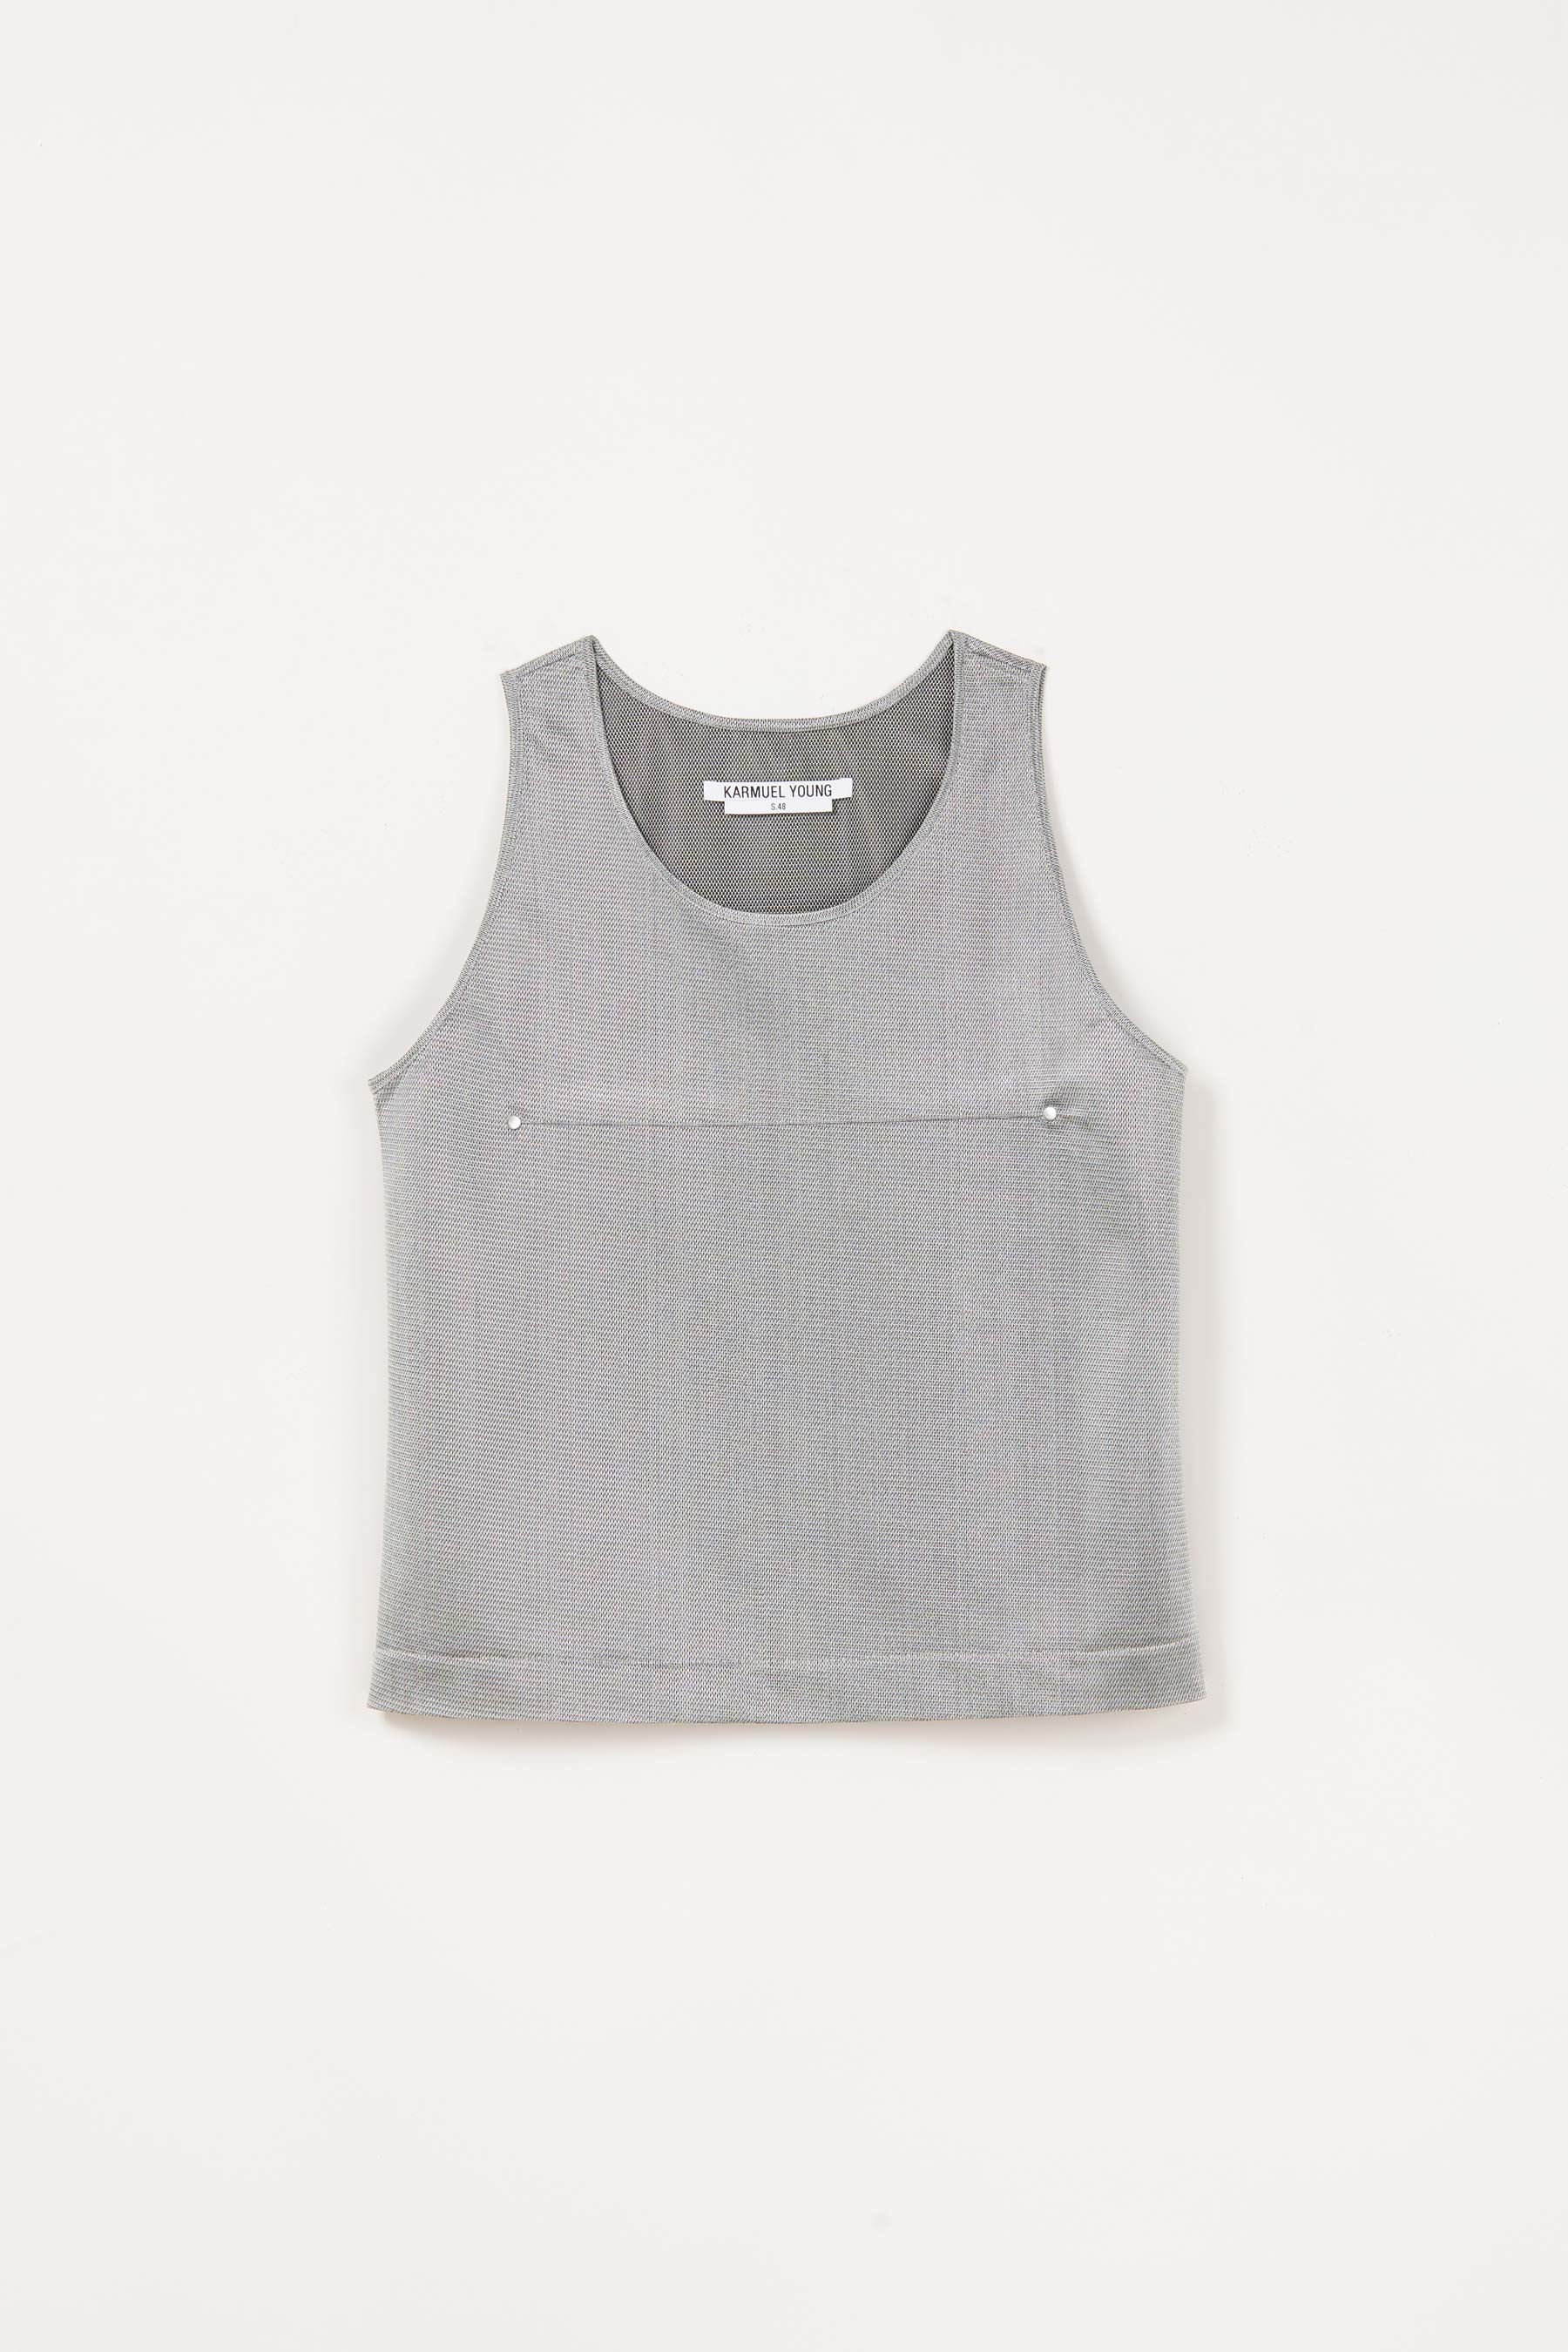 Silver Polyester Nylon Square Tank Tops with Studs